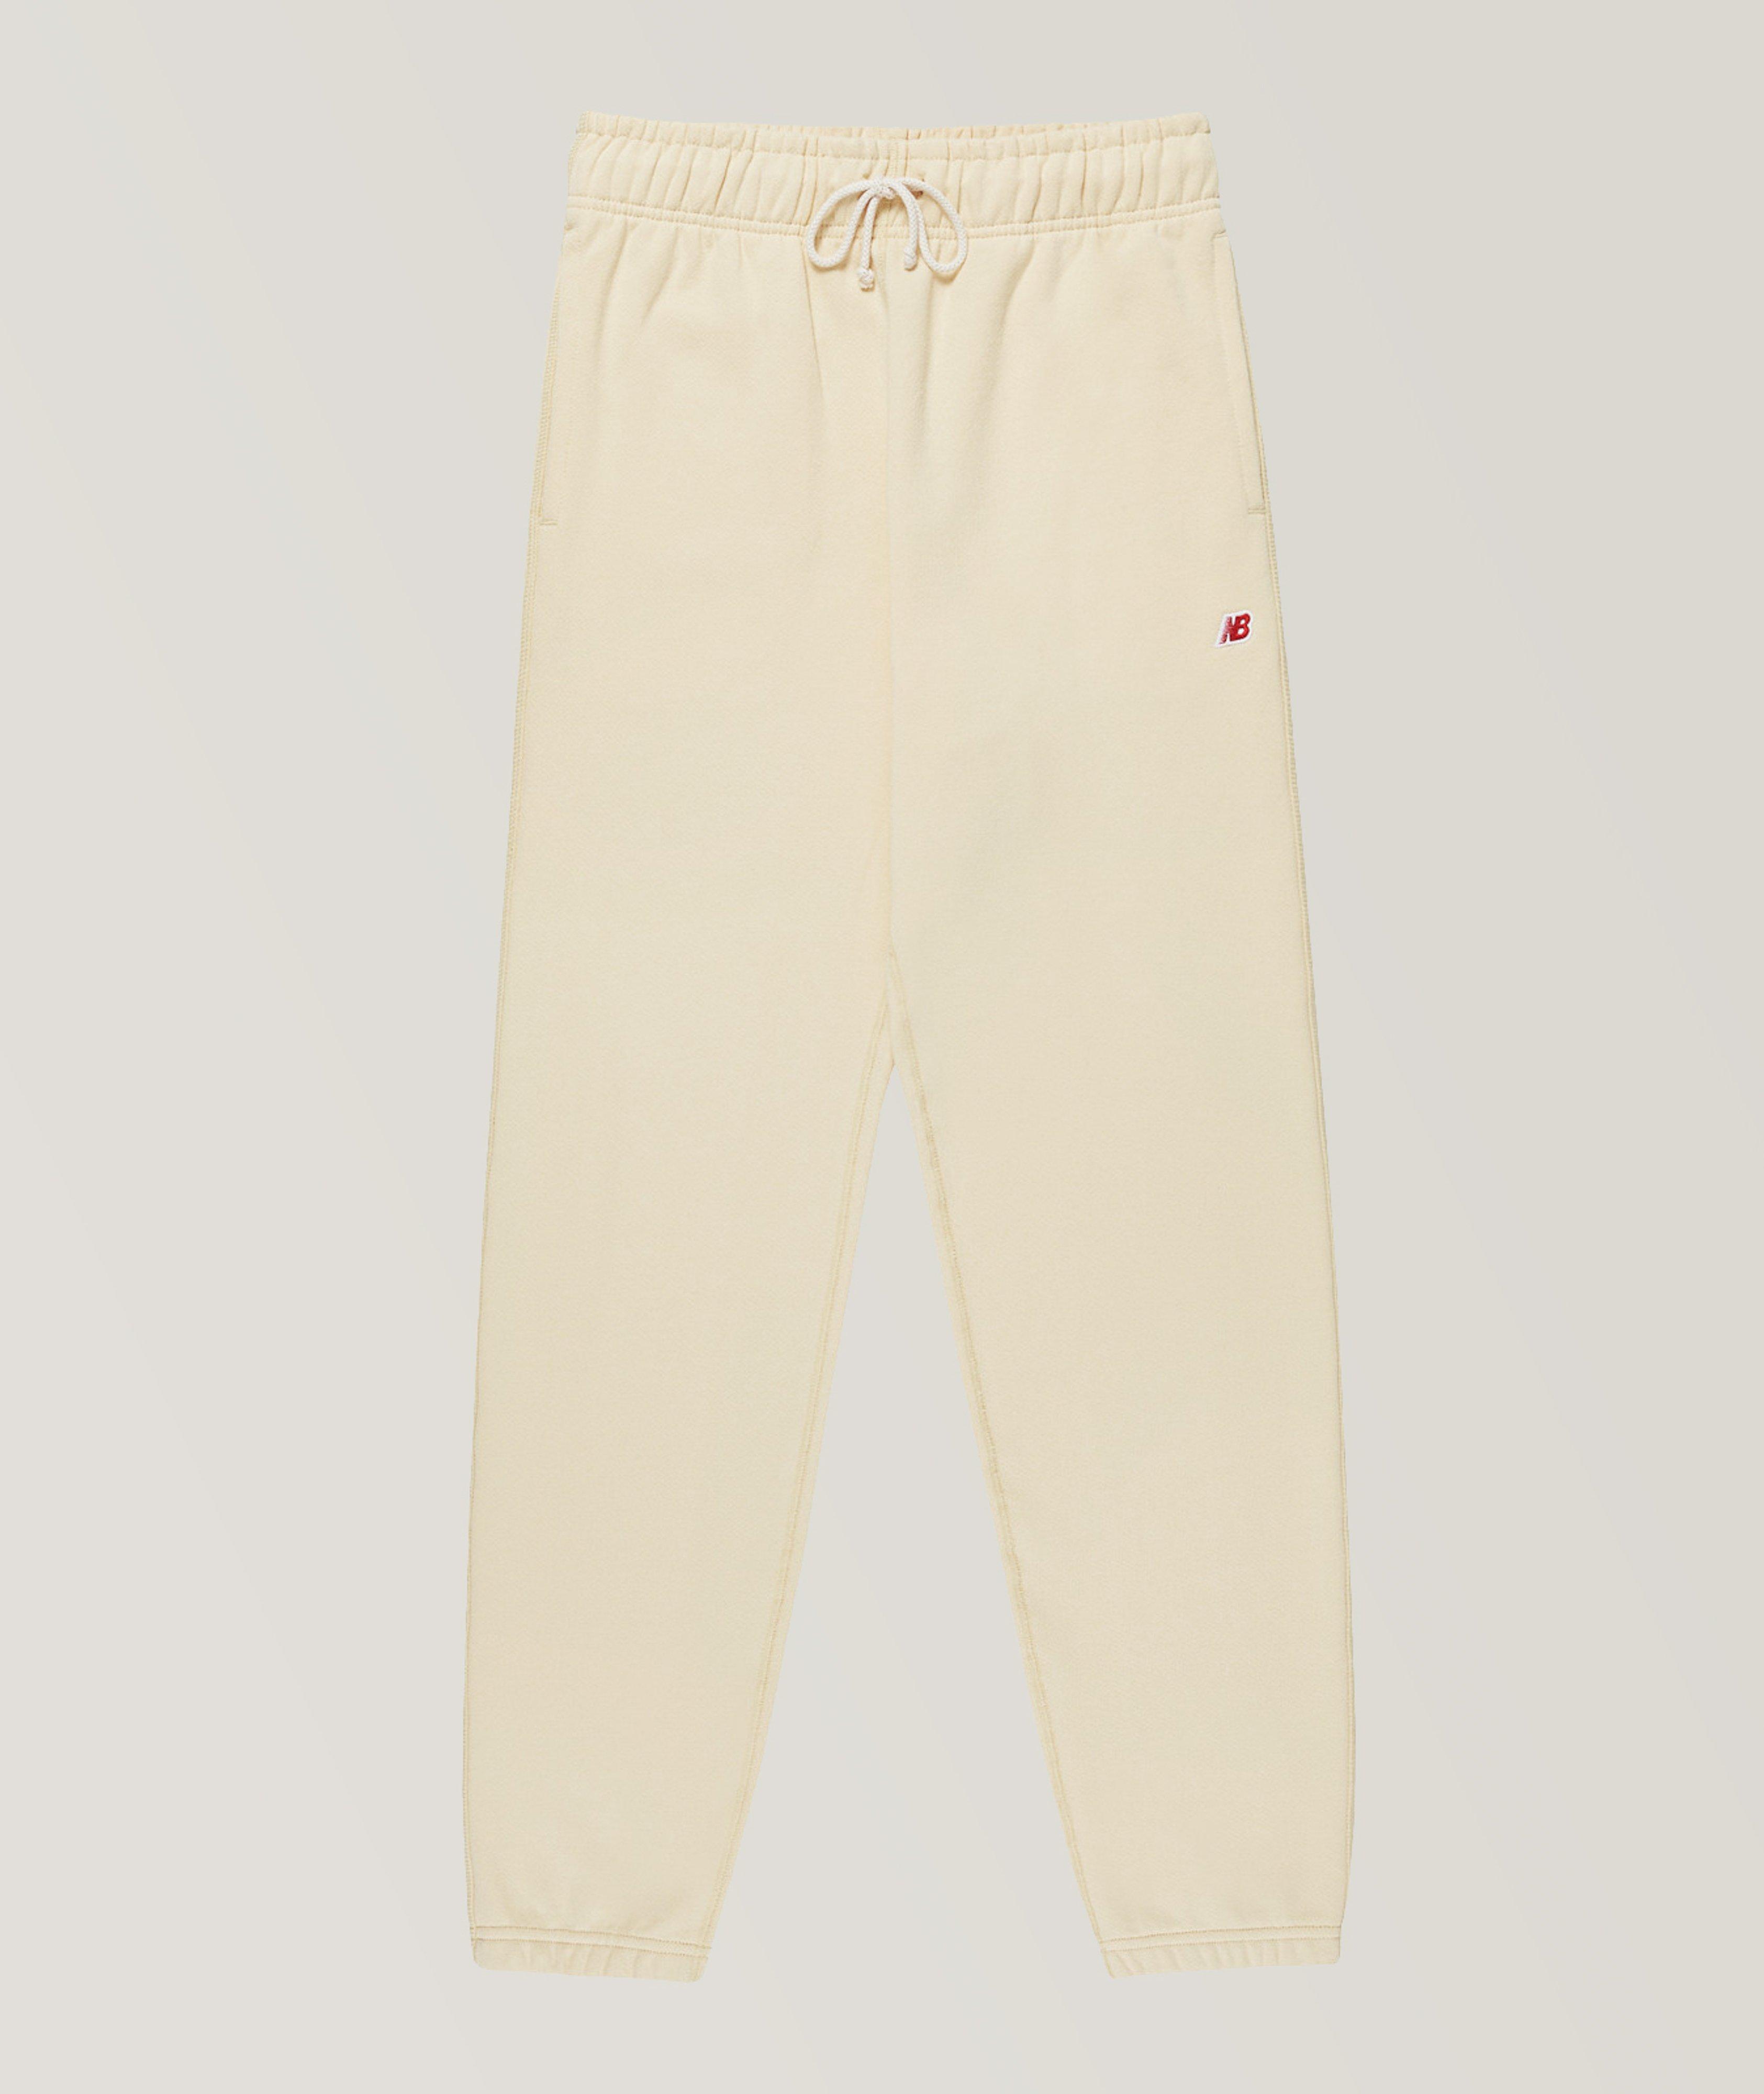 French Terry Cotton Sweatpants